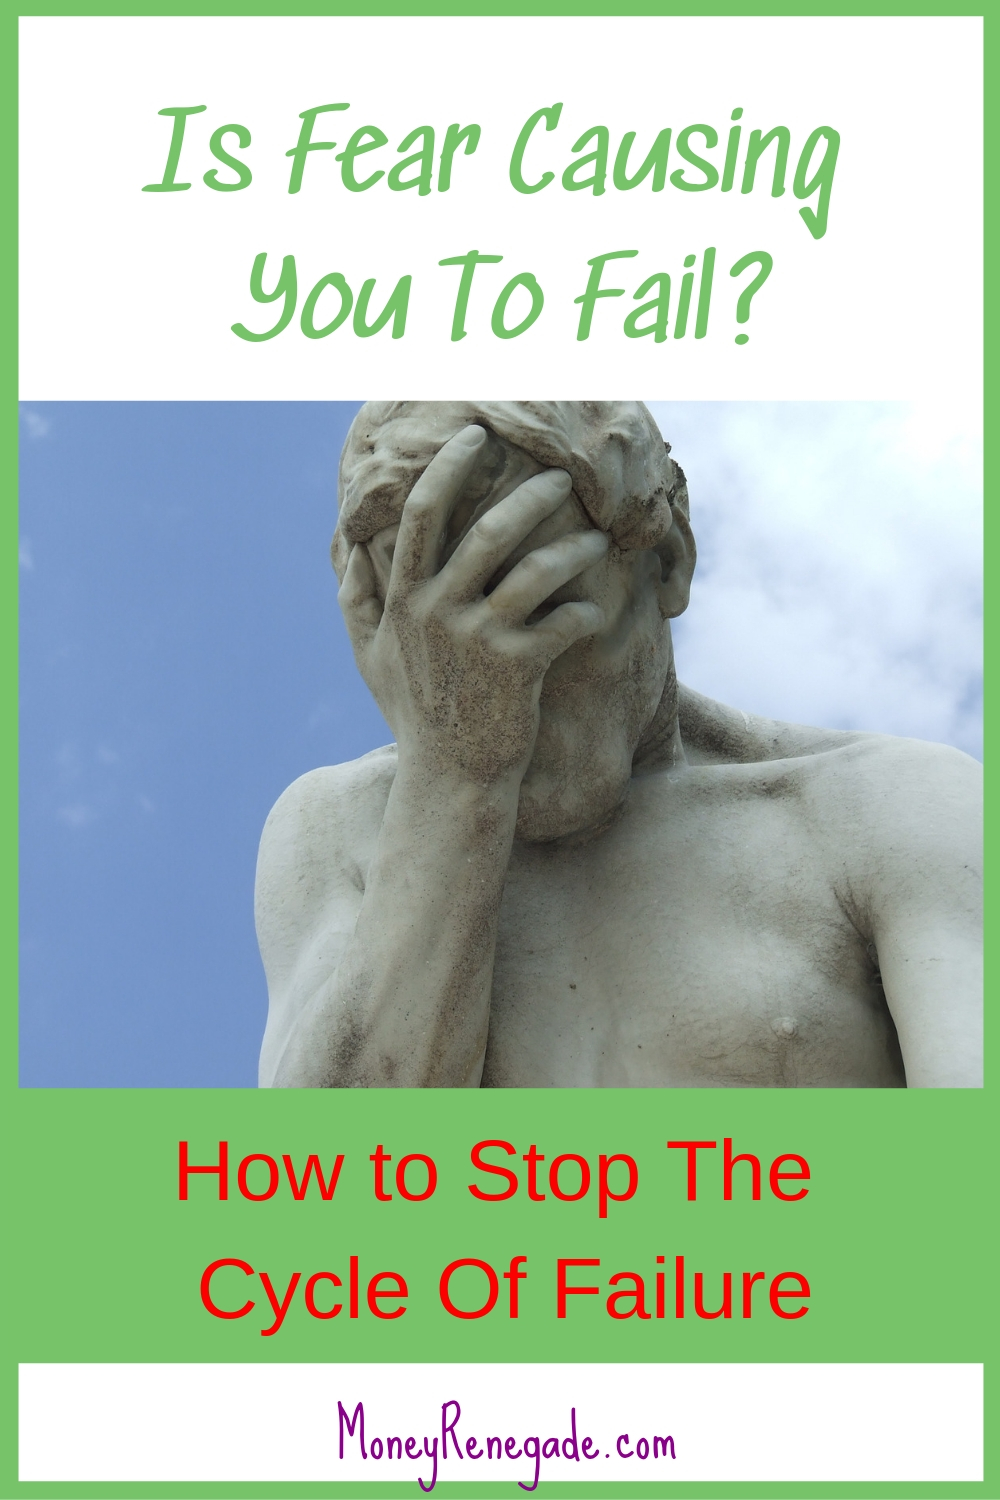 How to stop the cycle of failure